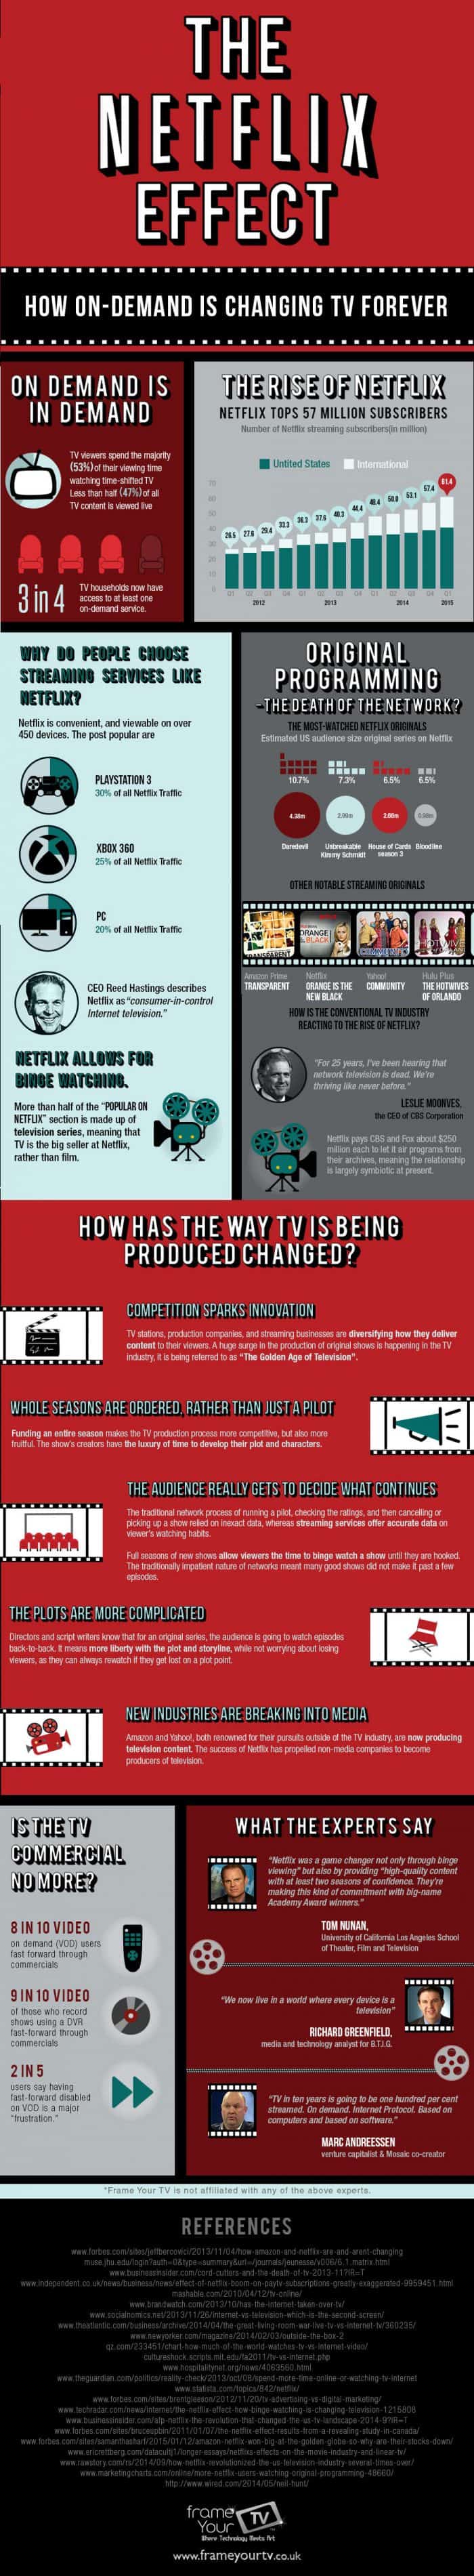 The Netflix Effect Infographic